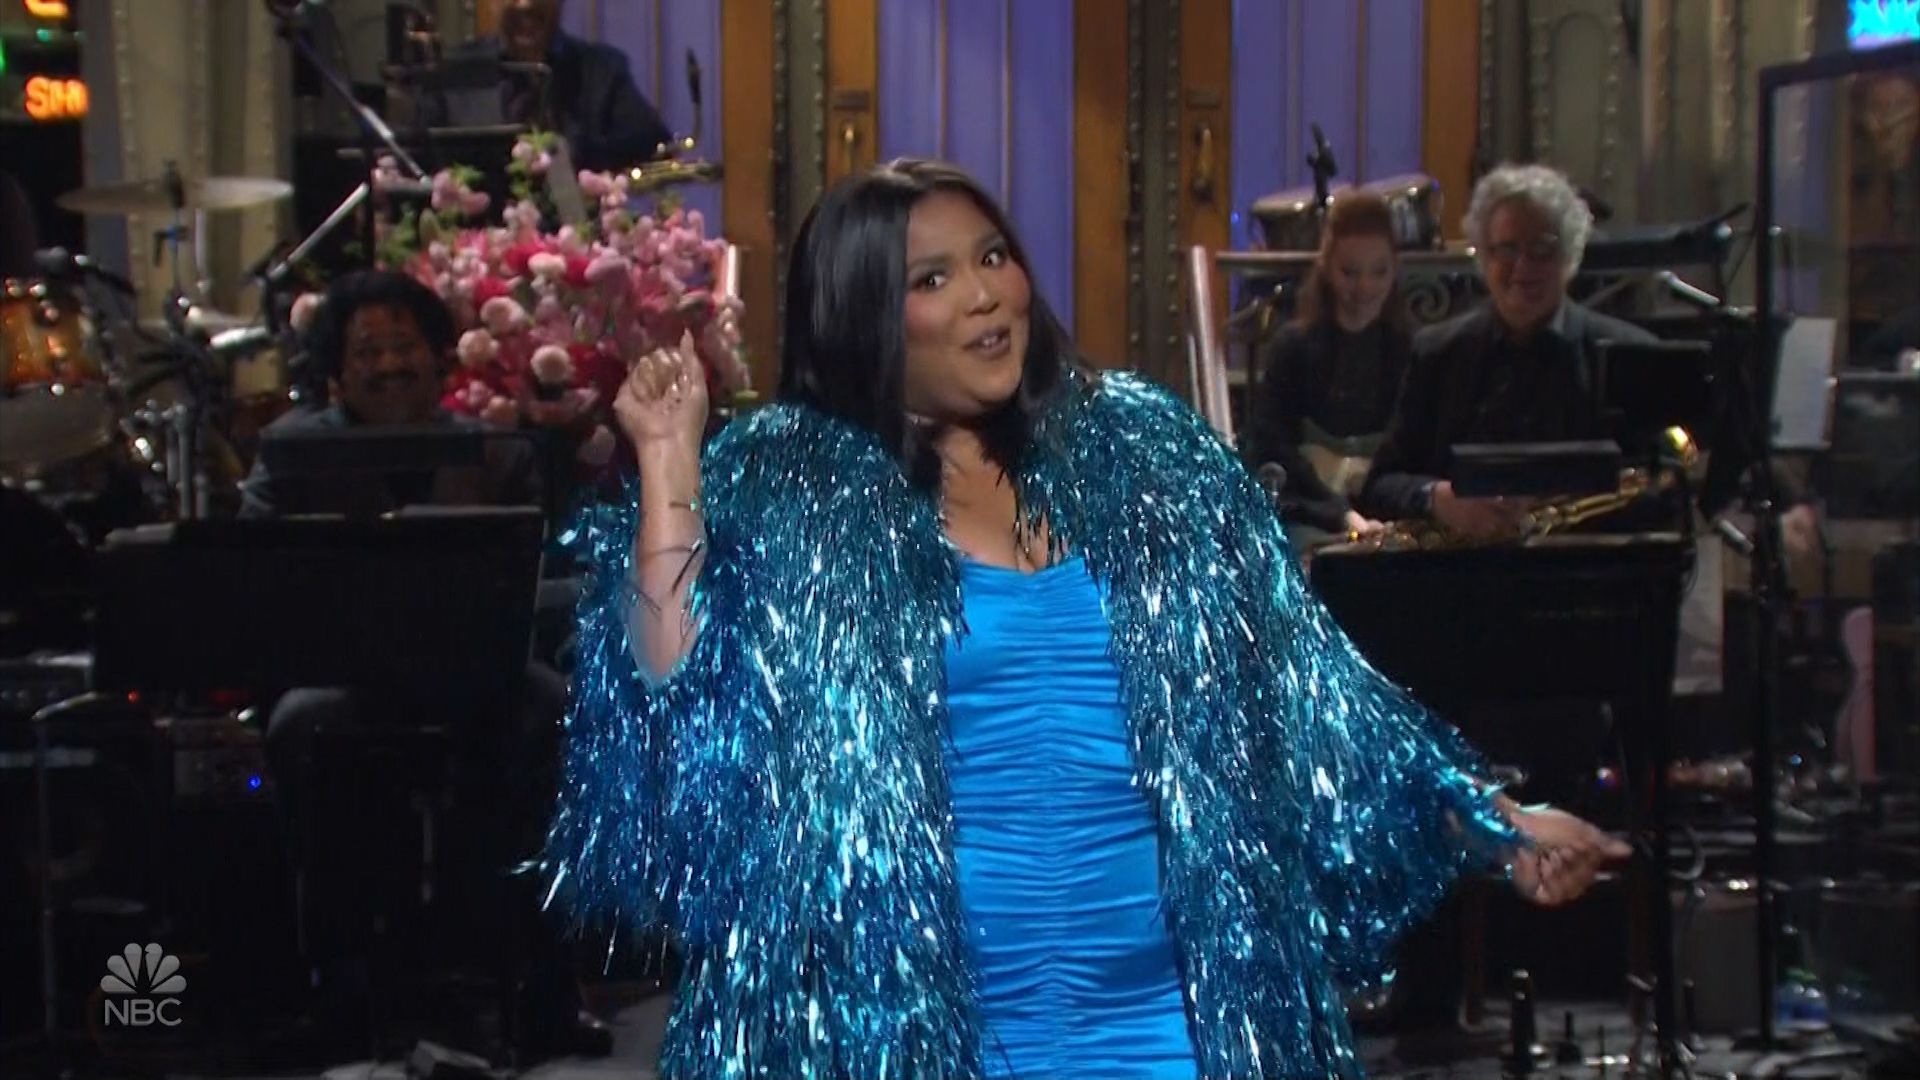 Lizzo Wears 'Yitty' During 'SNL' Hosting Debut: Where to Buy Her Look